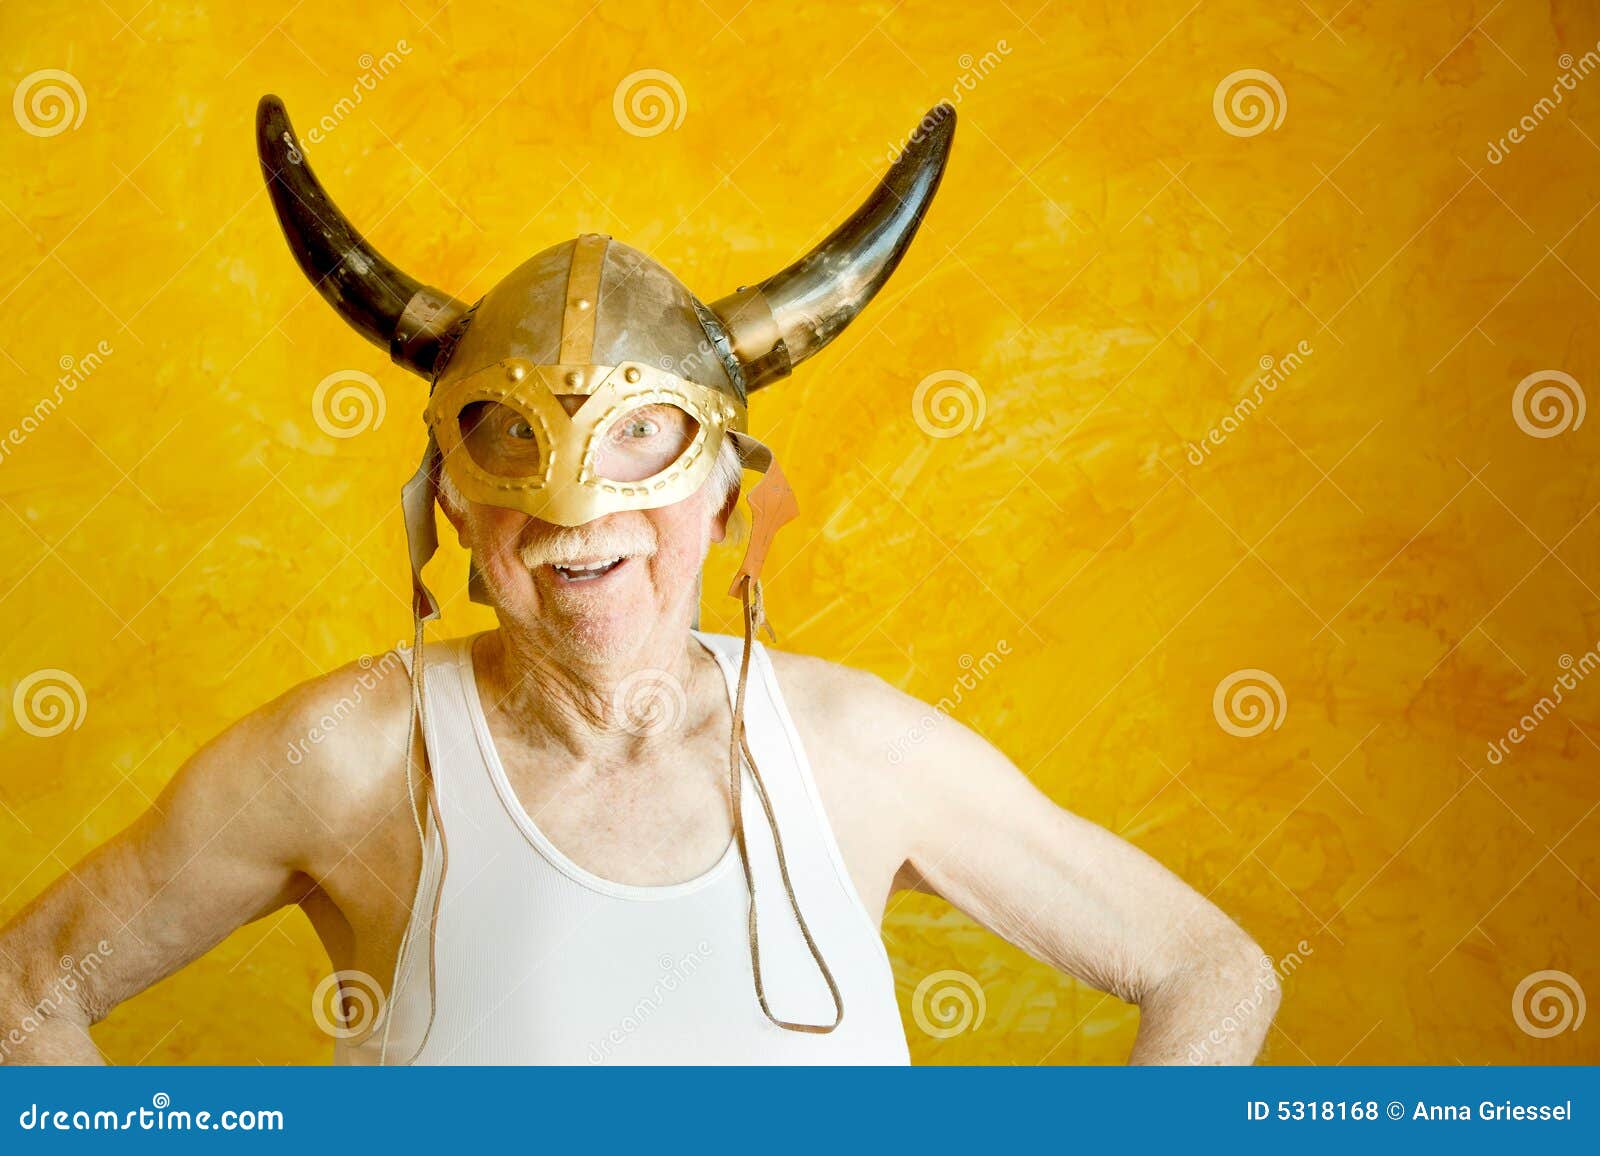 Crazy Old Man In A Viking Helmet Royalty Free Stock Photos - Image: 5318168